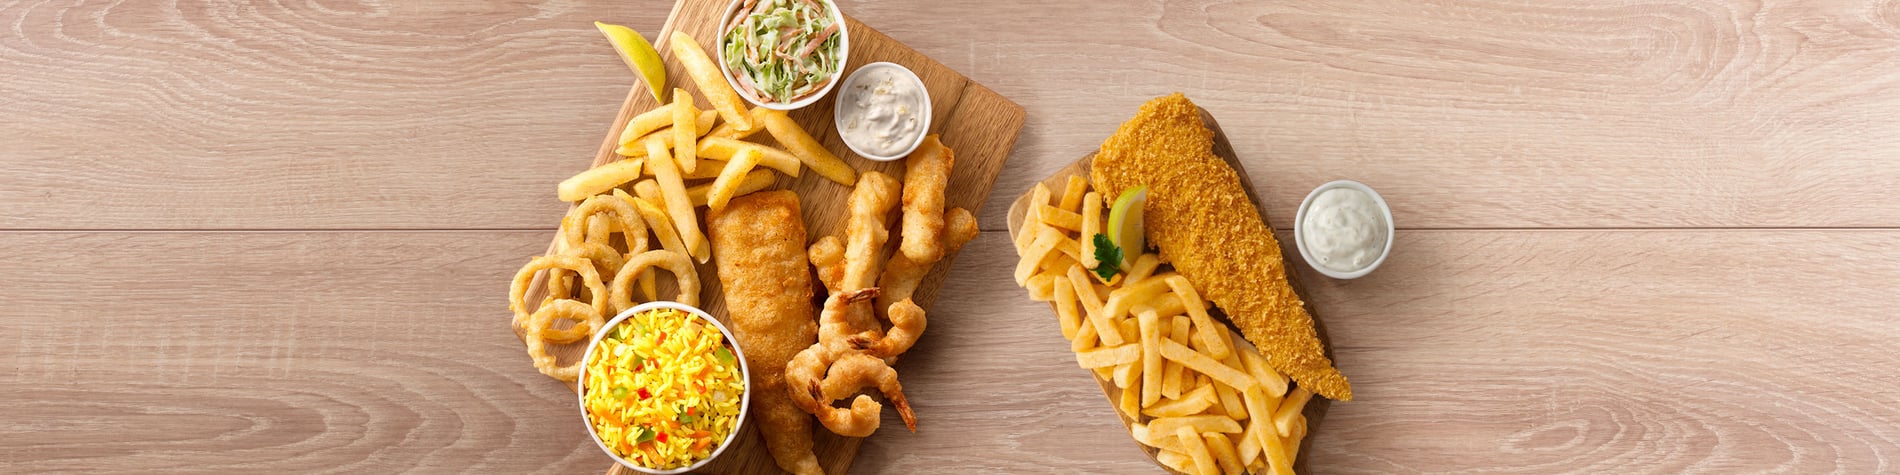 Seafood meals from Fishaways Stellenbosch Eikestad Mall including a Crunchy Fish and Chips meal and a seafood Platter for One with hake, calamari, prawns, chips, onion rings, and coleslaw.